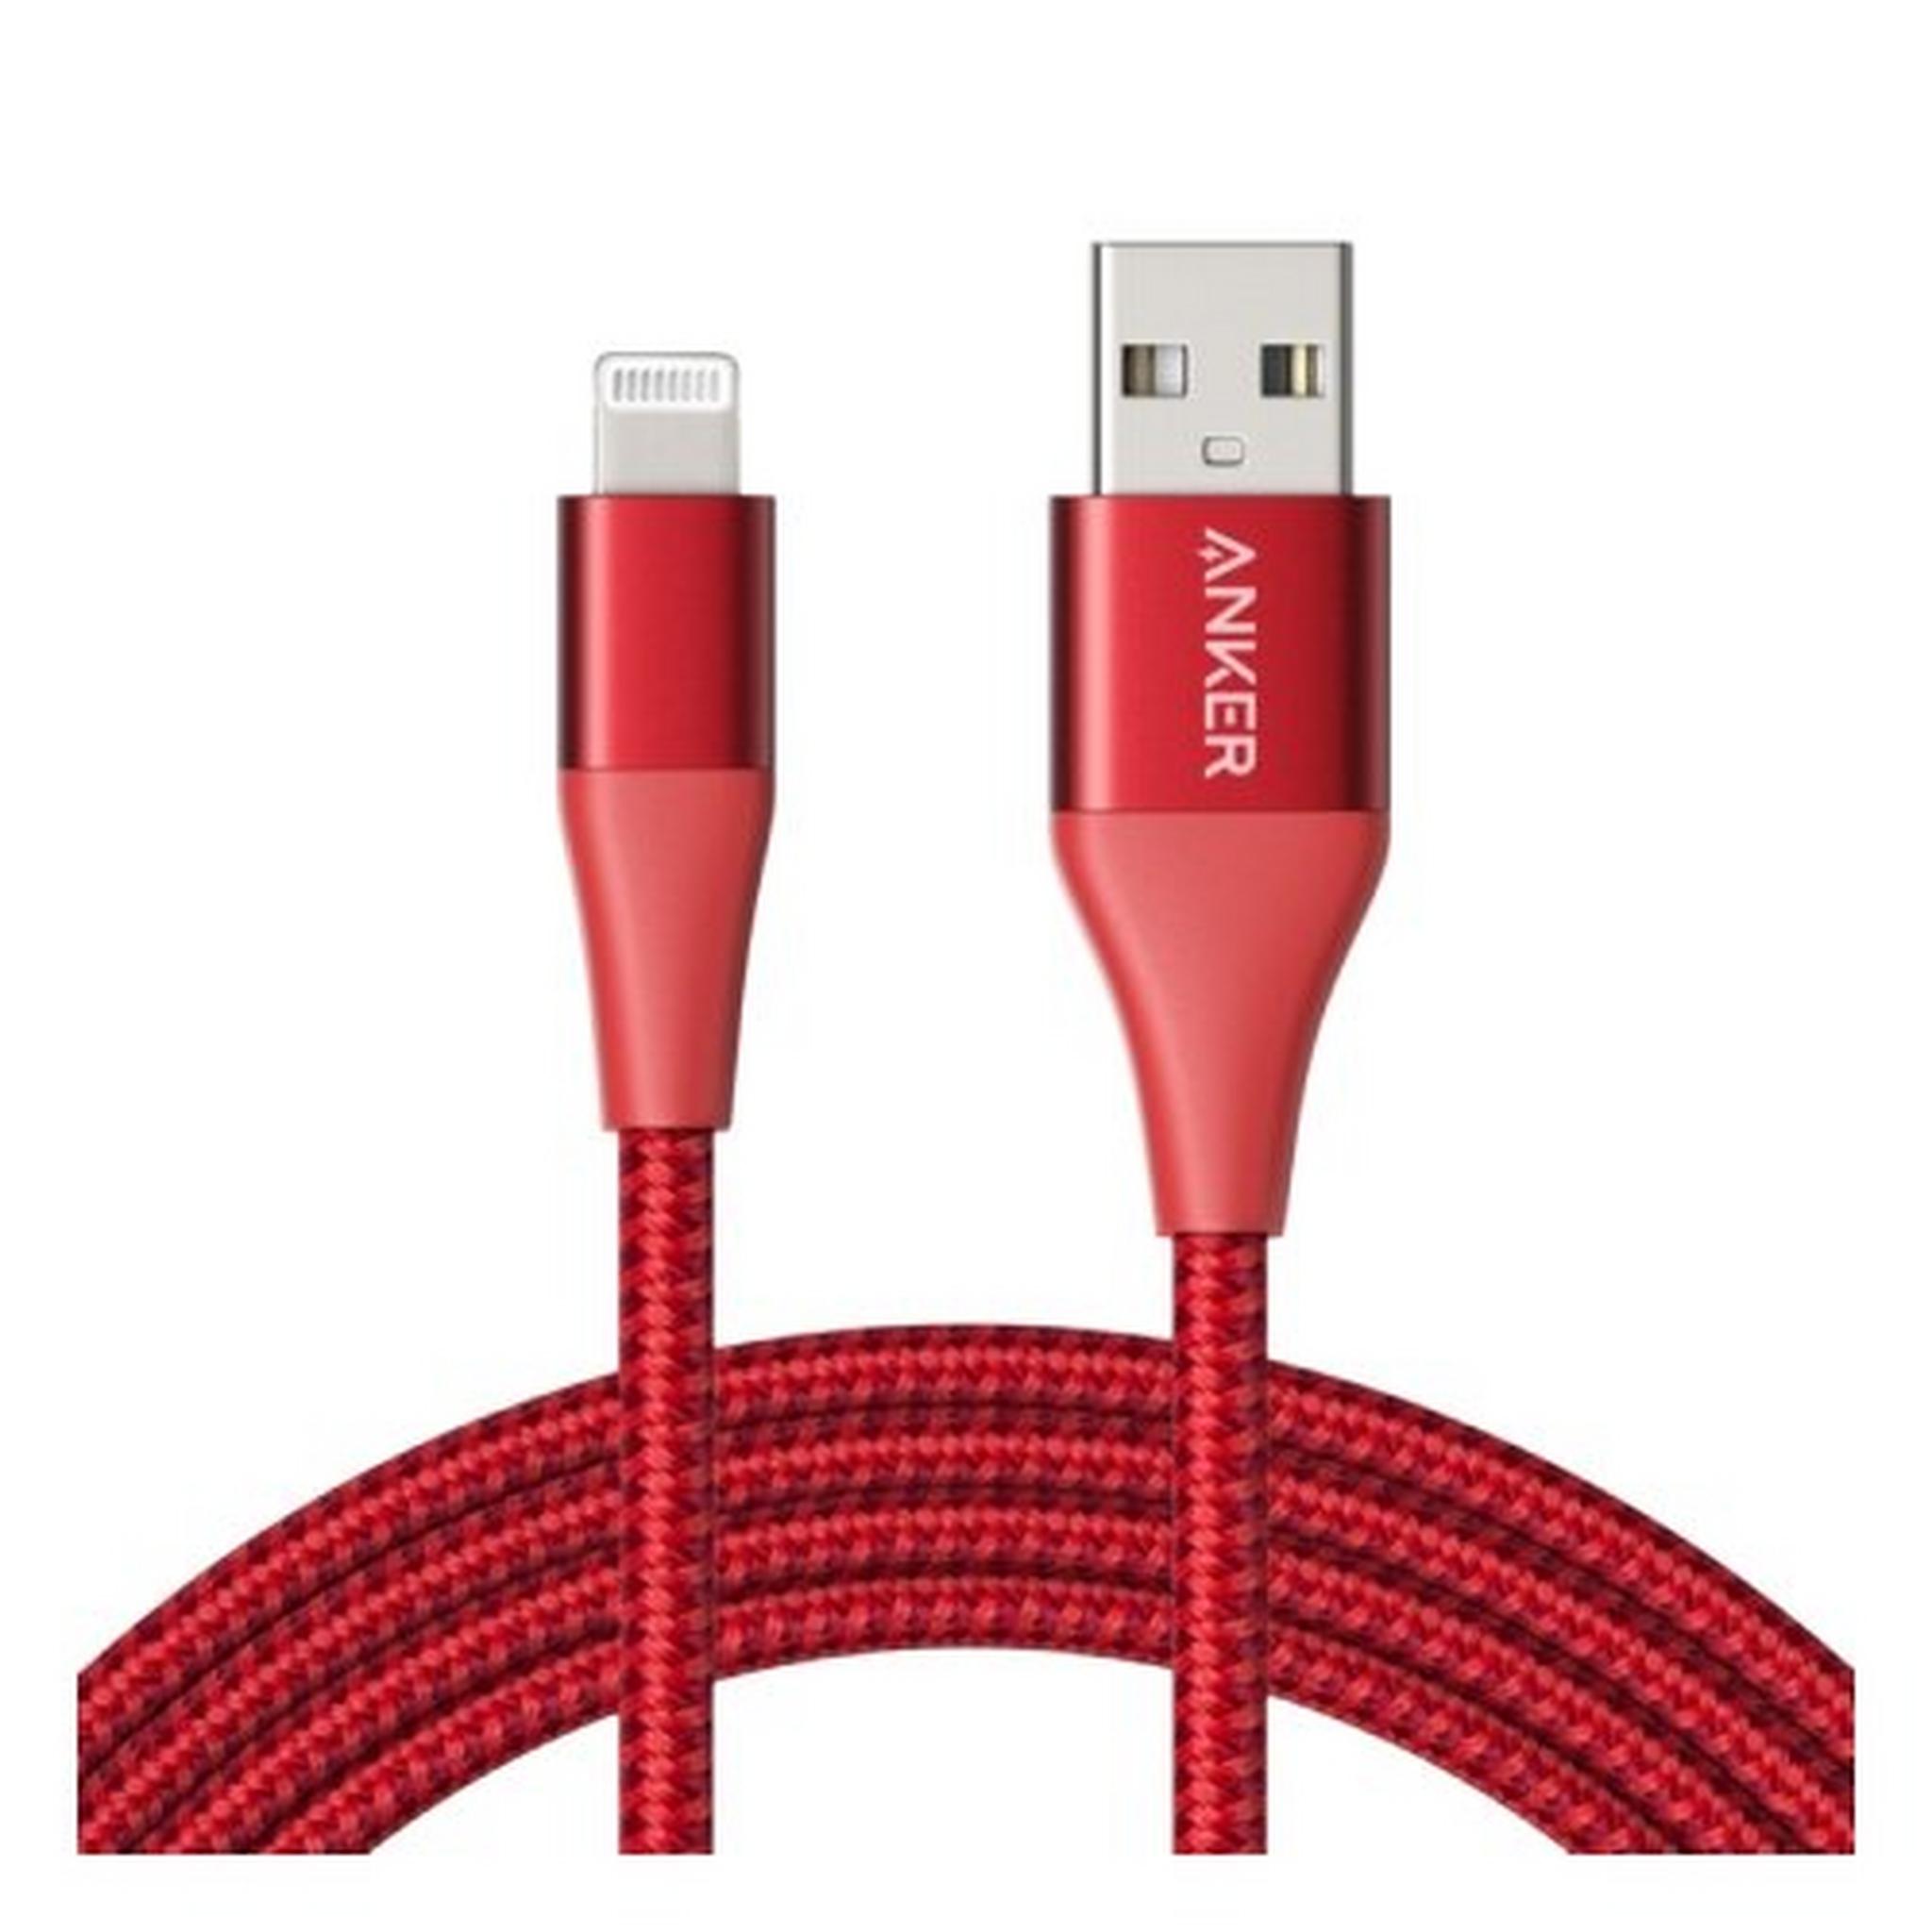 Anker PowerLine+ II Lightning Cable 3FT/0.9M (A8452H93) -  Red